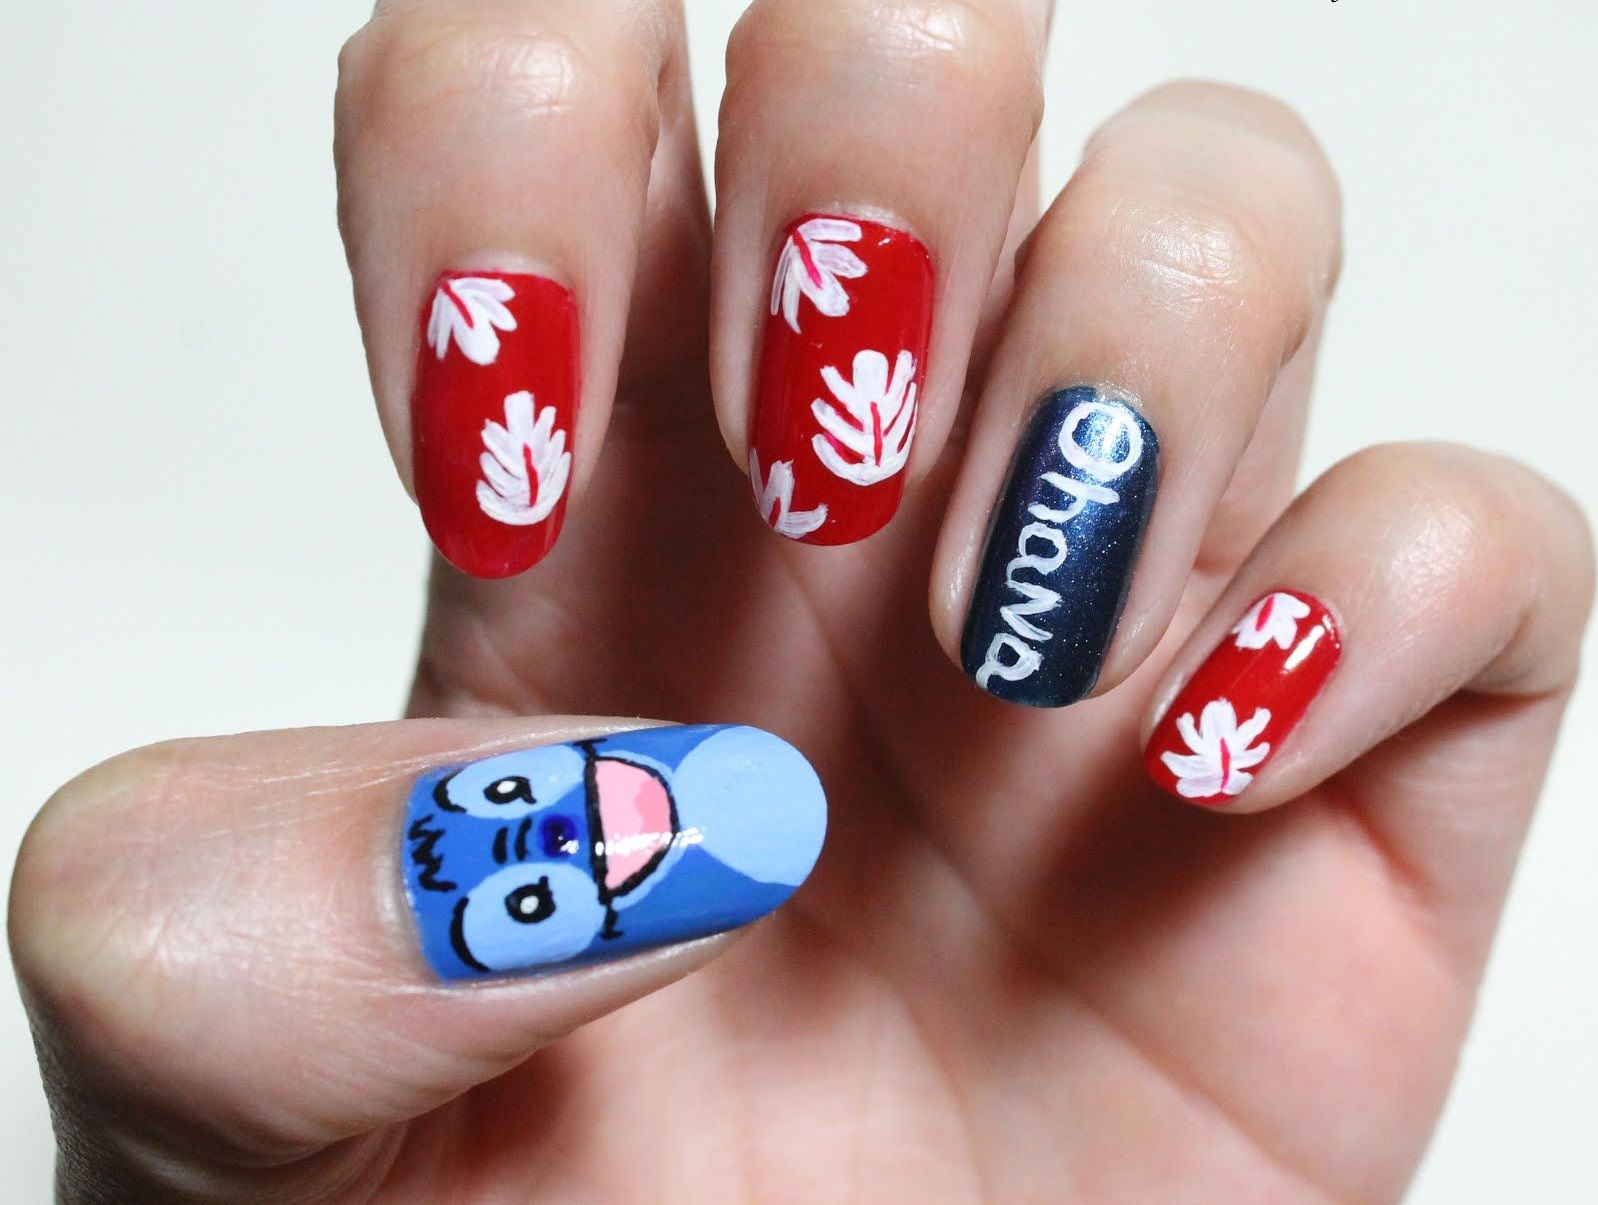 Lilo and Stitch Nail Design 2 70+ Magical Disney Nail Designs That Look Cute - 30